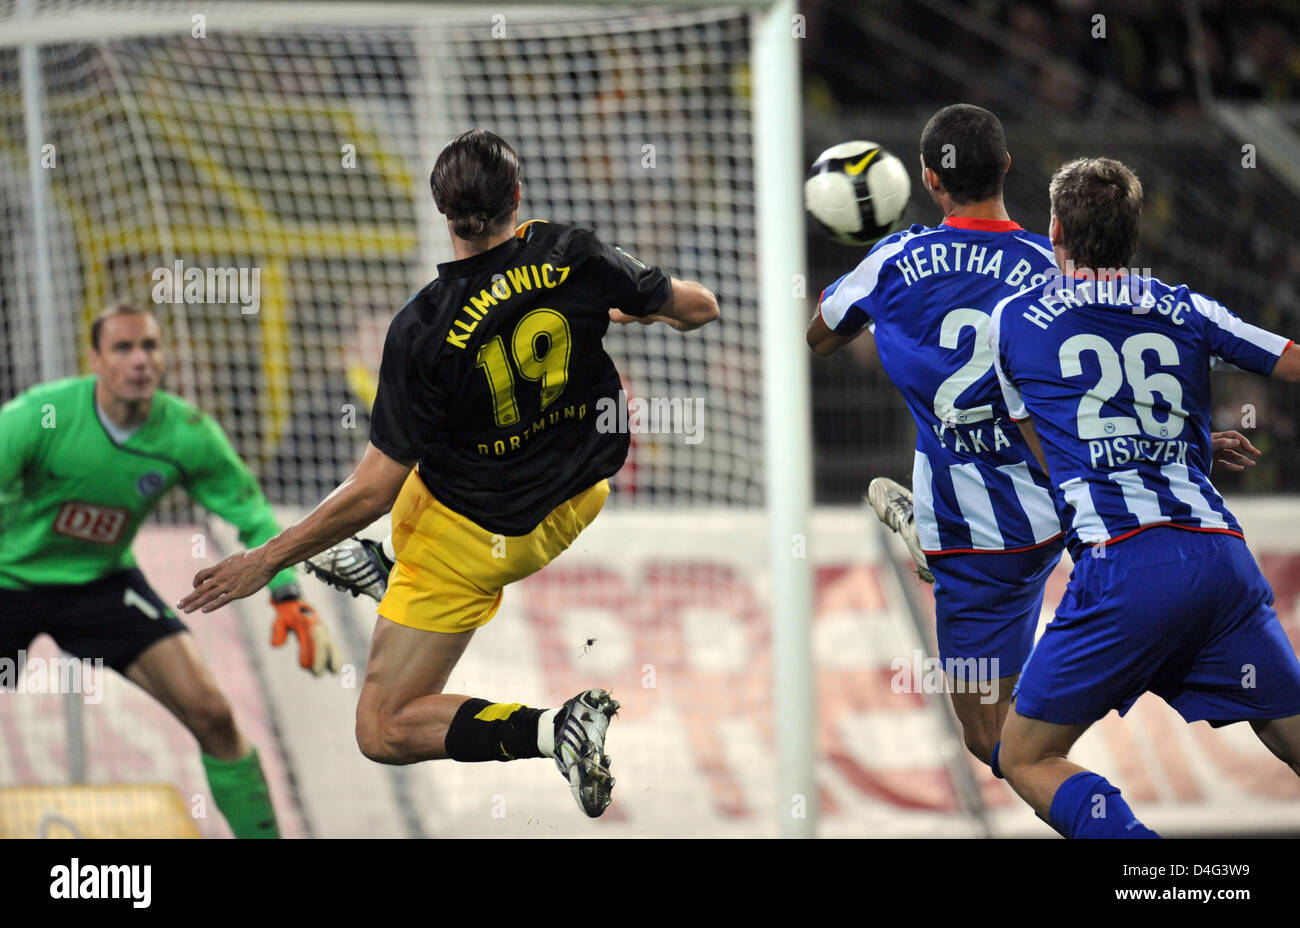 Arbentine Diego Klimowicz (2-L) of Borussia Dortmund scores the 2-1 against Hertha BSC Berlin players Polish Lukasz Piszczek (R), Brazilian Kaka (2-R) and goalkeeper Jaroslav Drobny (L) during the second round of the German Football Federation's DFB Cup at Signal Iduna Park in Dortmund, Germany, 24 September 2008. Photo: Bernd Thissen (ATTENTION: BLOCKING PERIOD! The DFB permits th Stock Photo